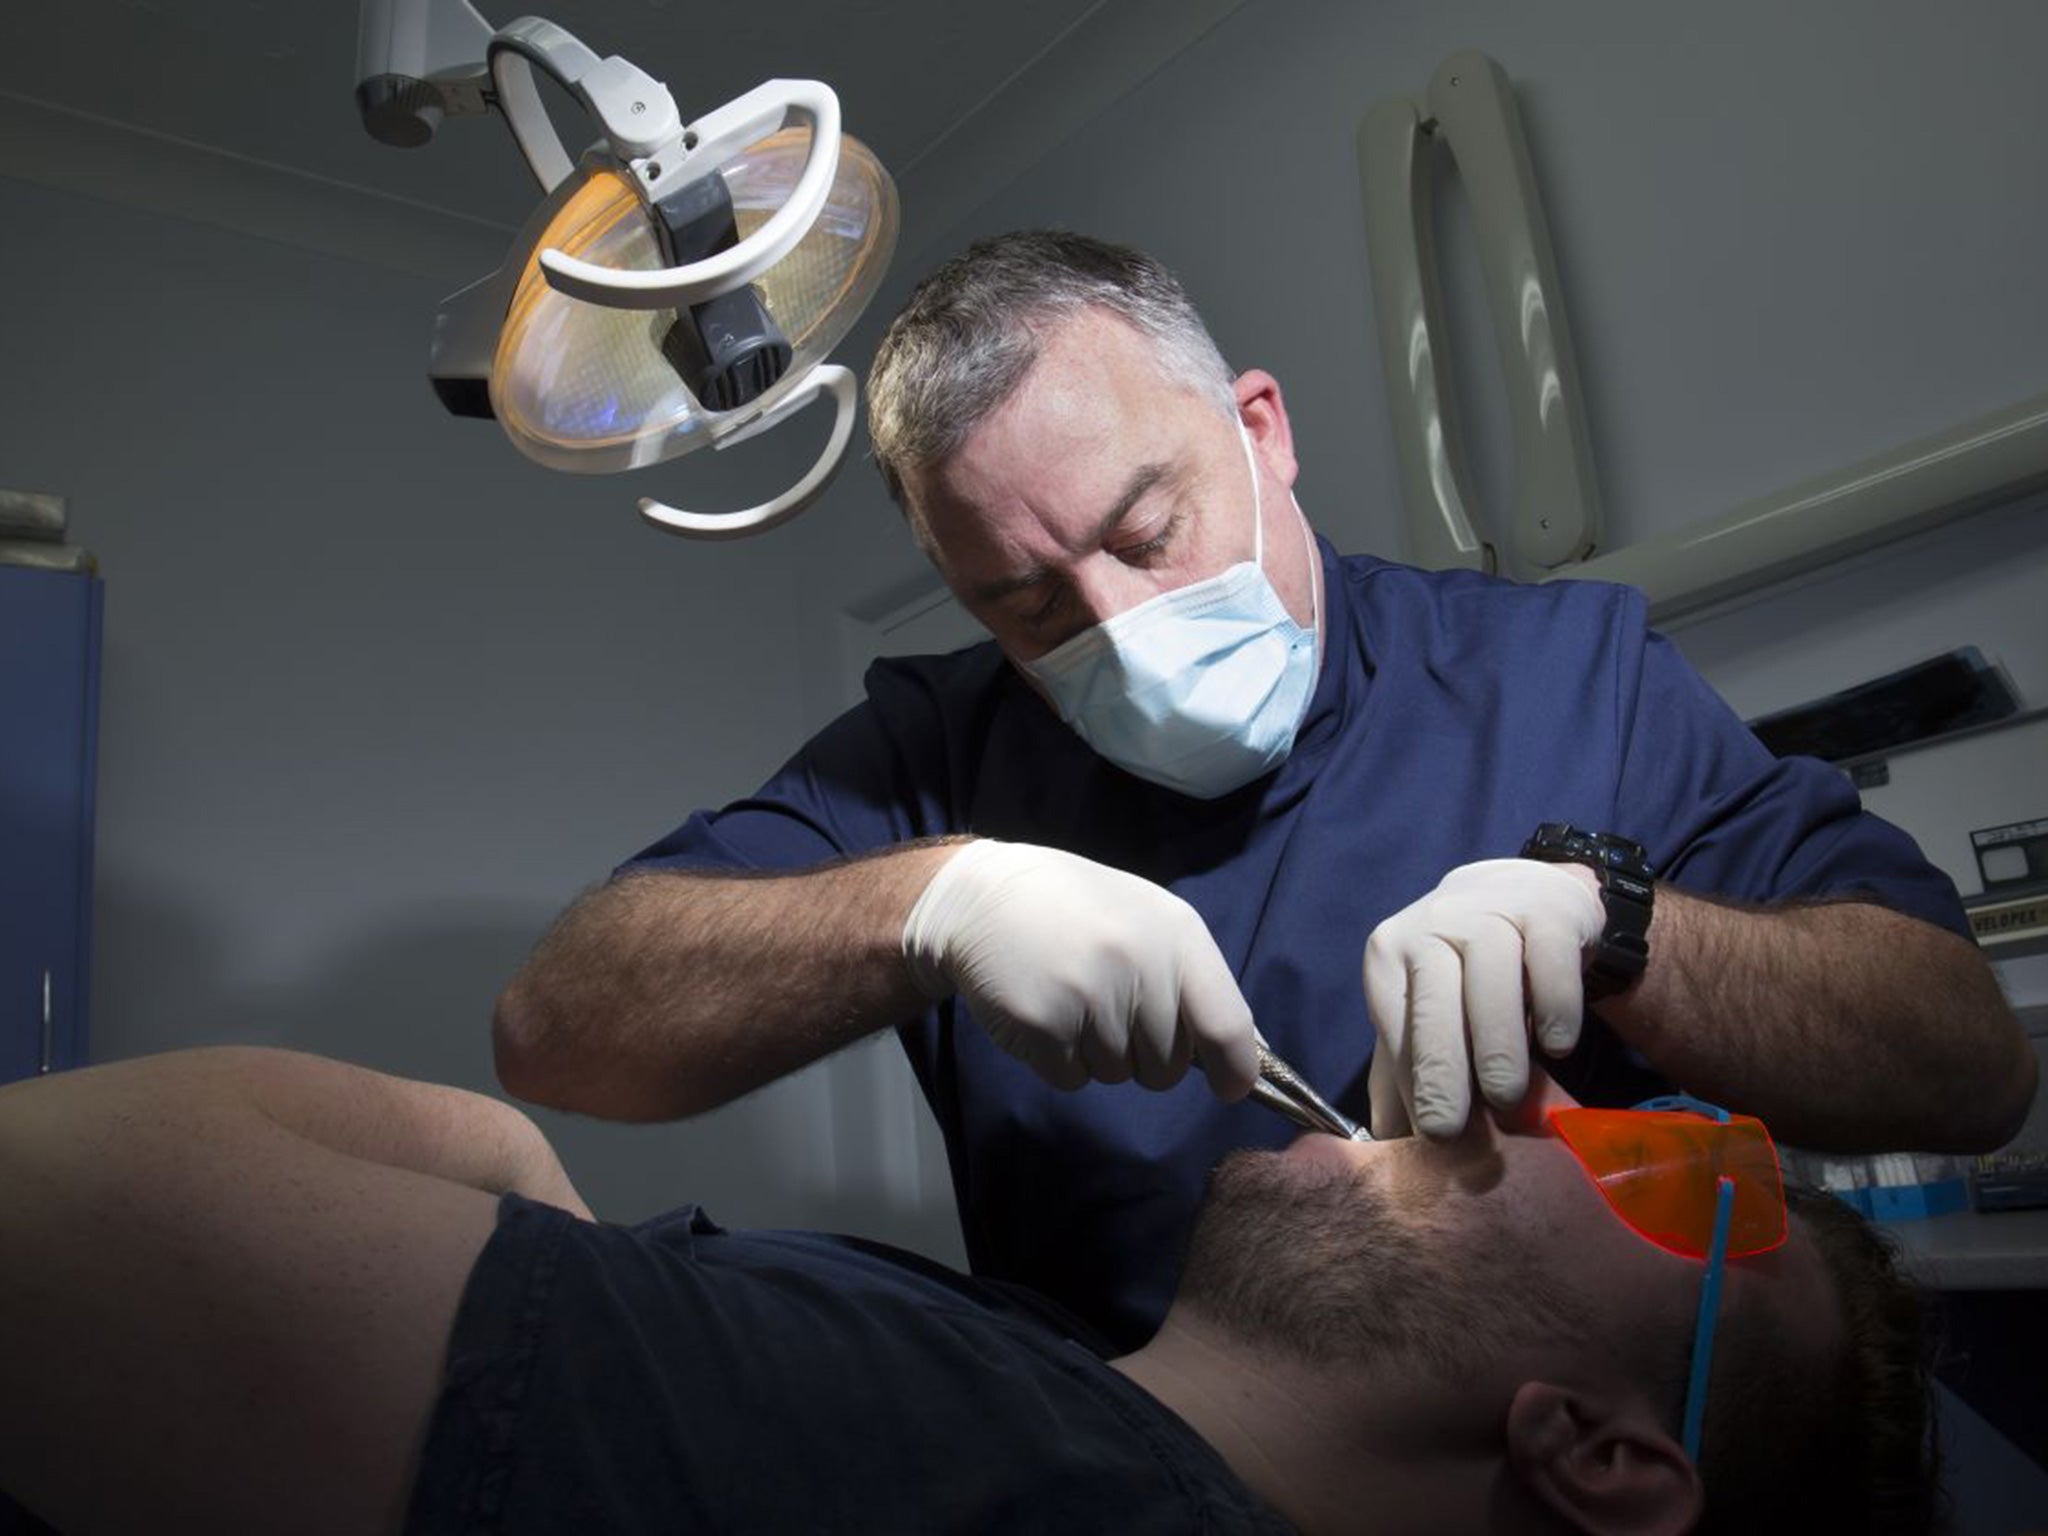 Dentists examine, diagnose, and treat diseases, injuries, and malformations of teeth and gums